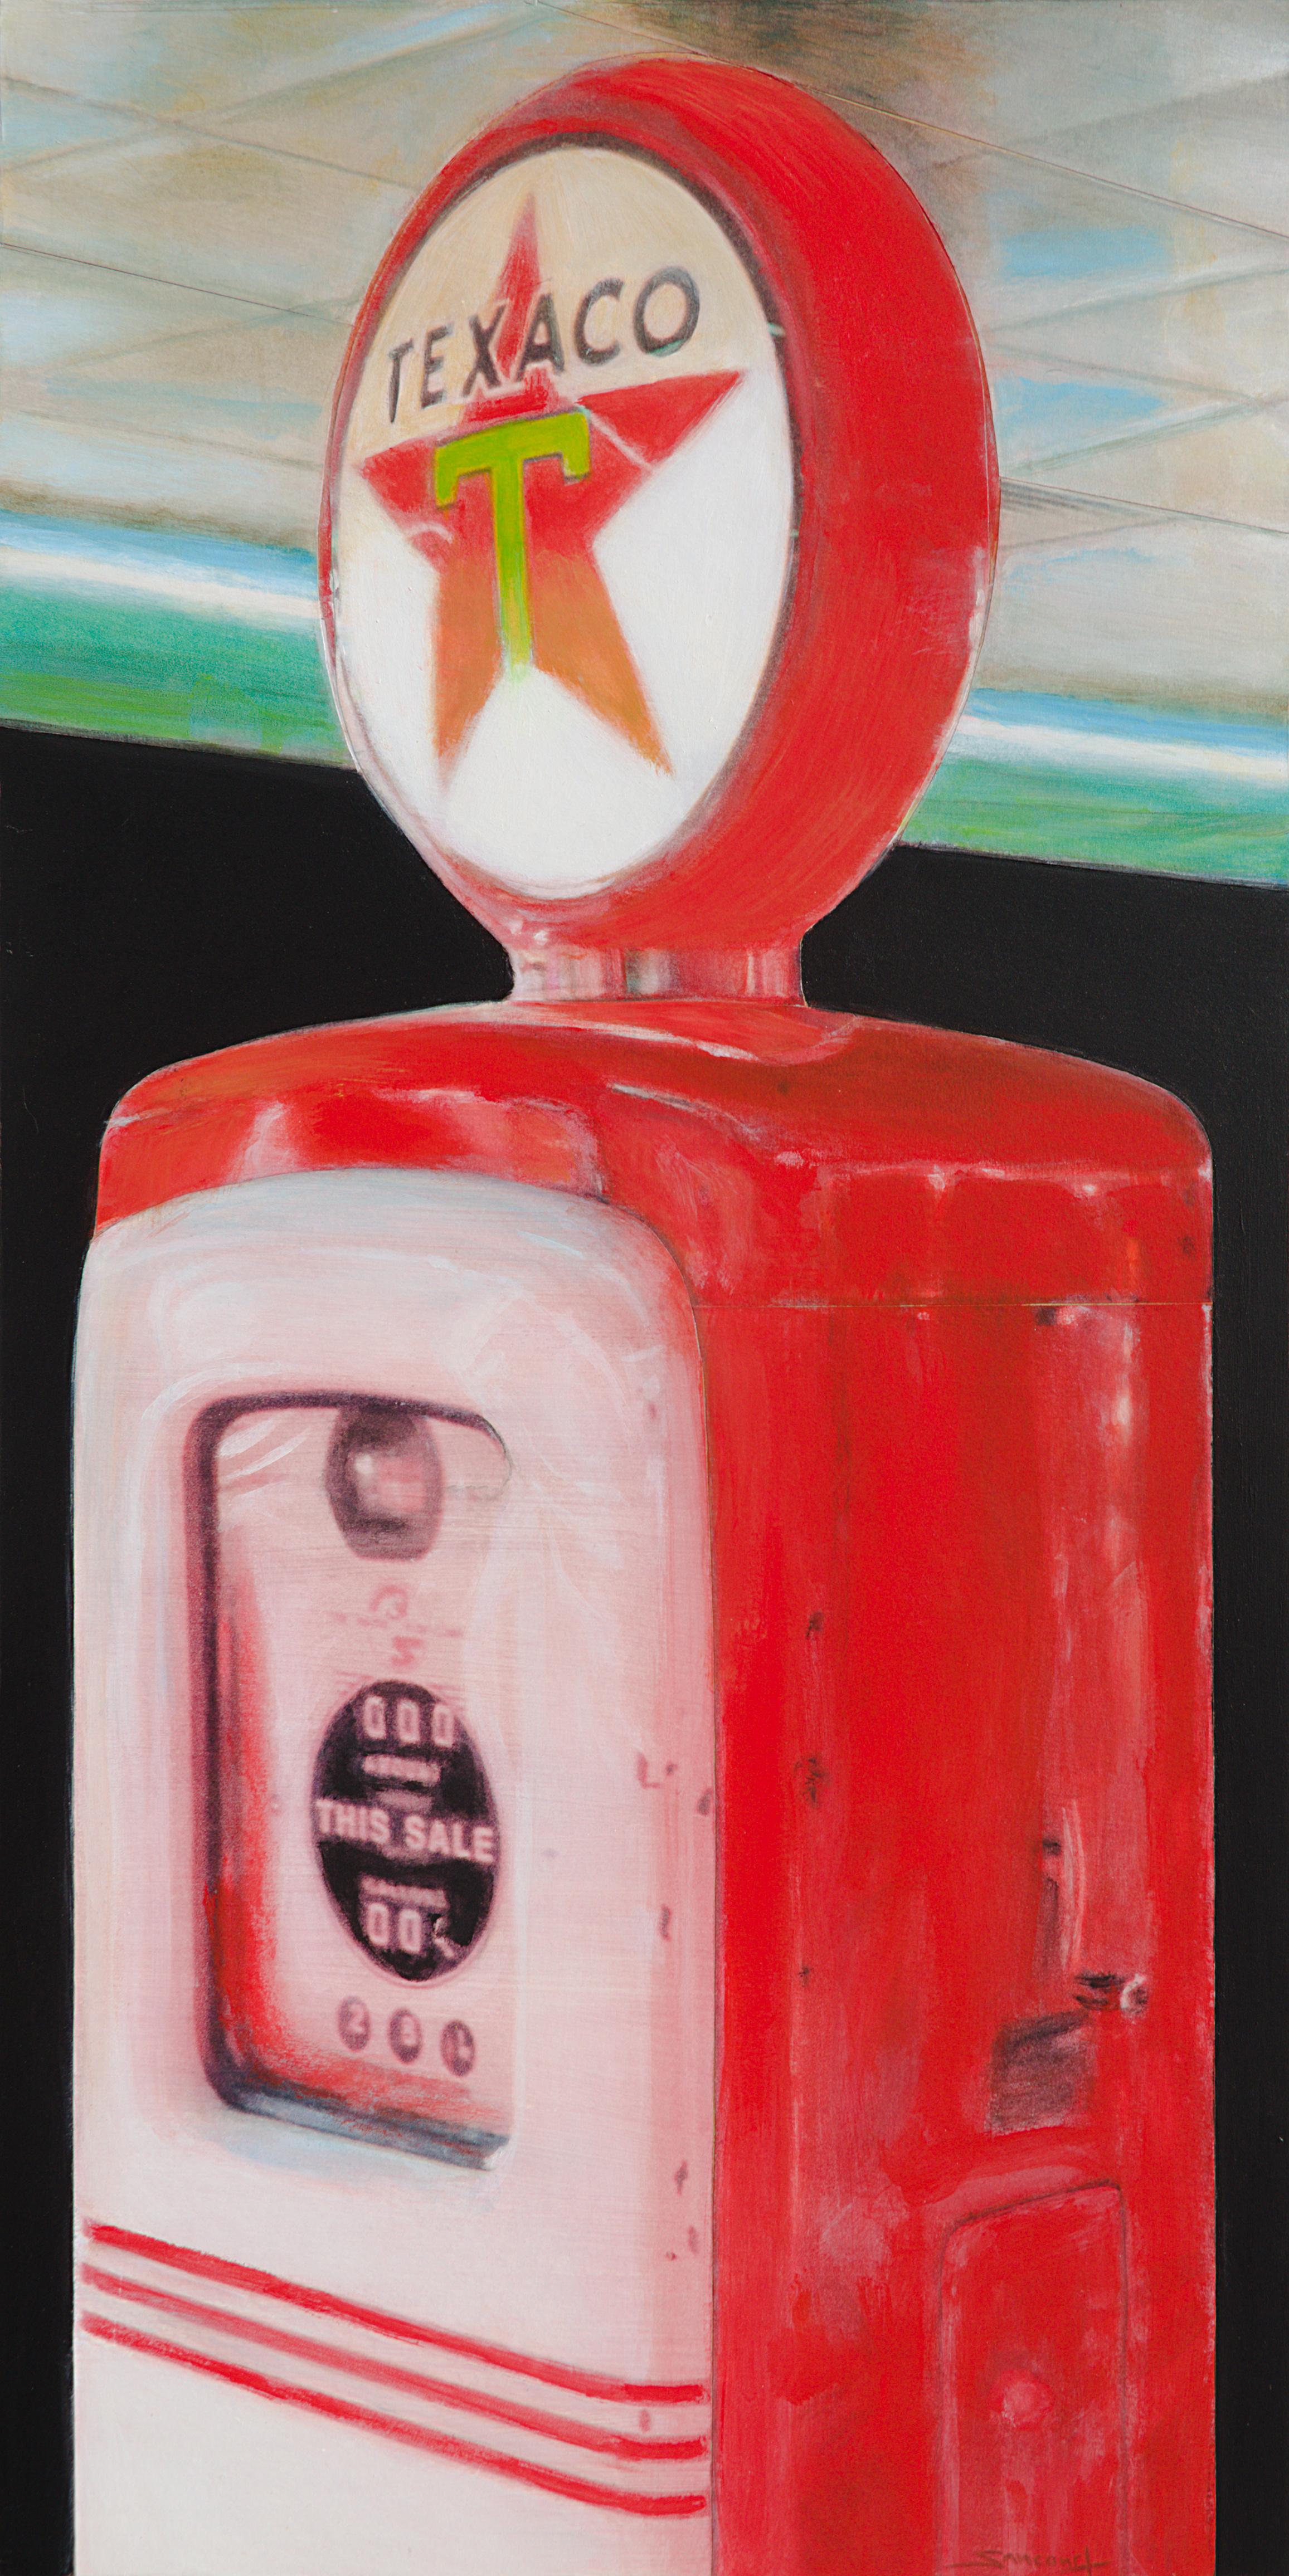 "Texaco #1", Red Vintage Gasoline Pump Vertical Mixed Media Painting - Mixed Media Art by Philippe Saucourt